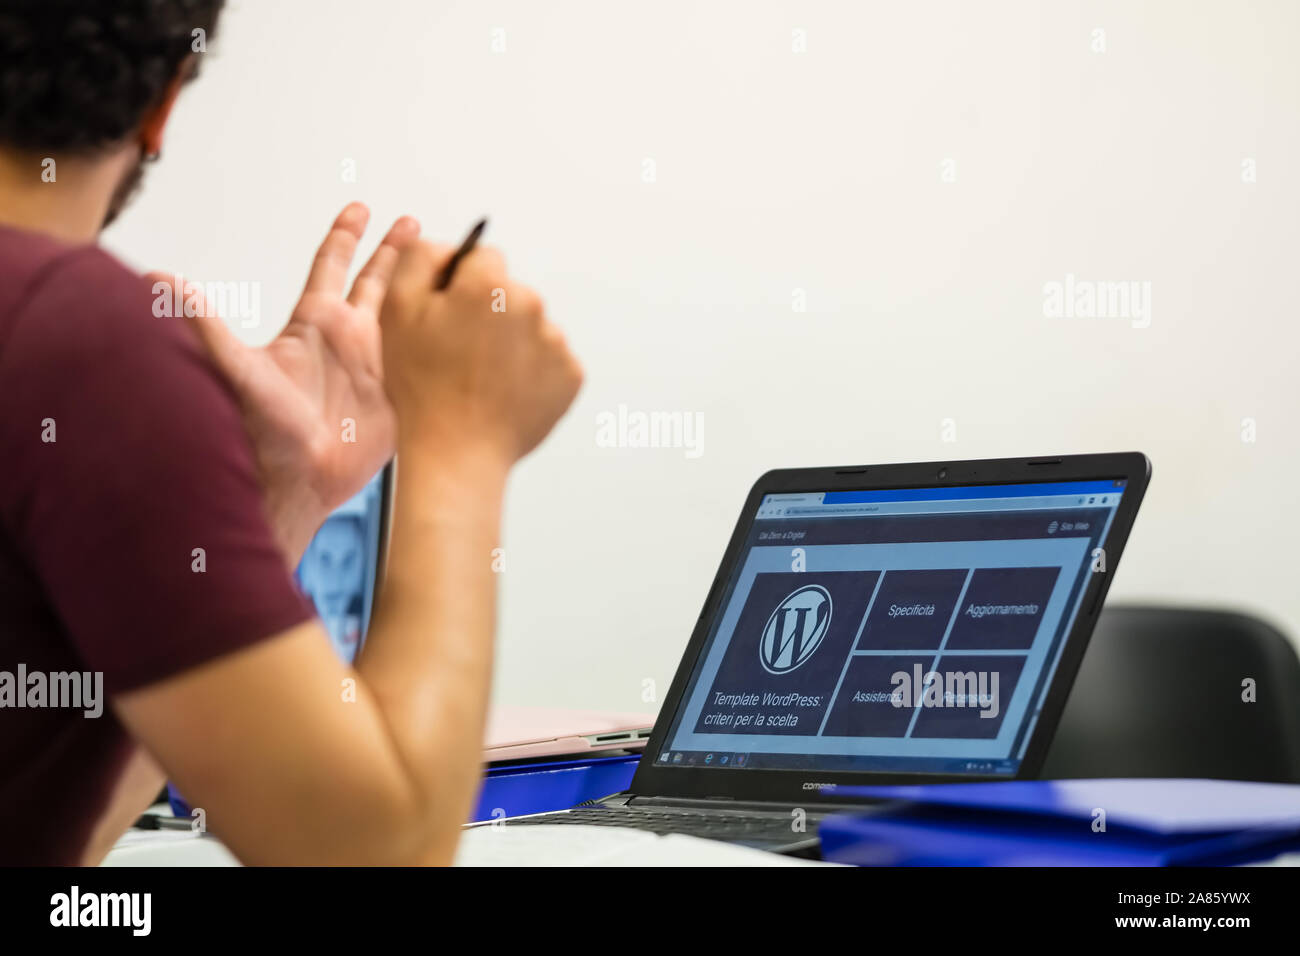 Laptop photographed with the Wordpress logo on the screen, young operator partially framed from behind with a pen in his hand. Stock Photo